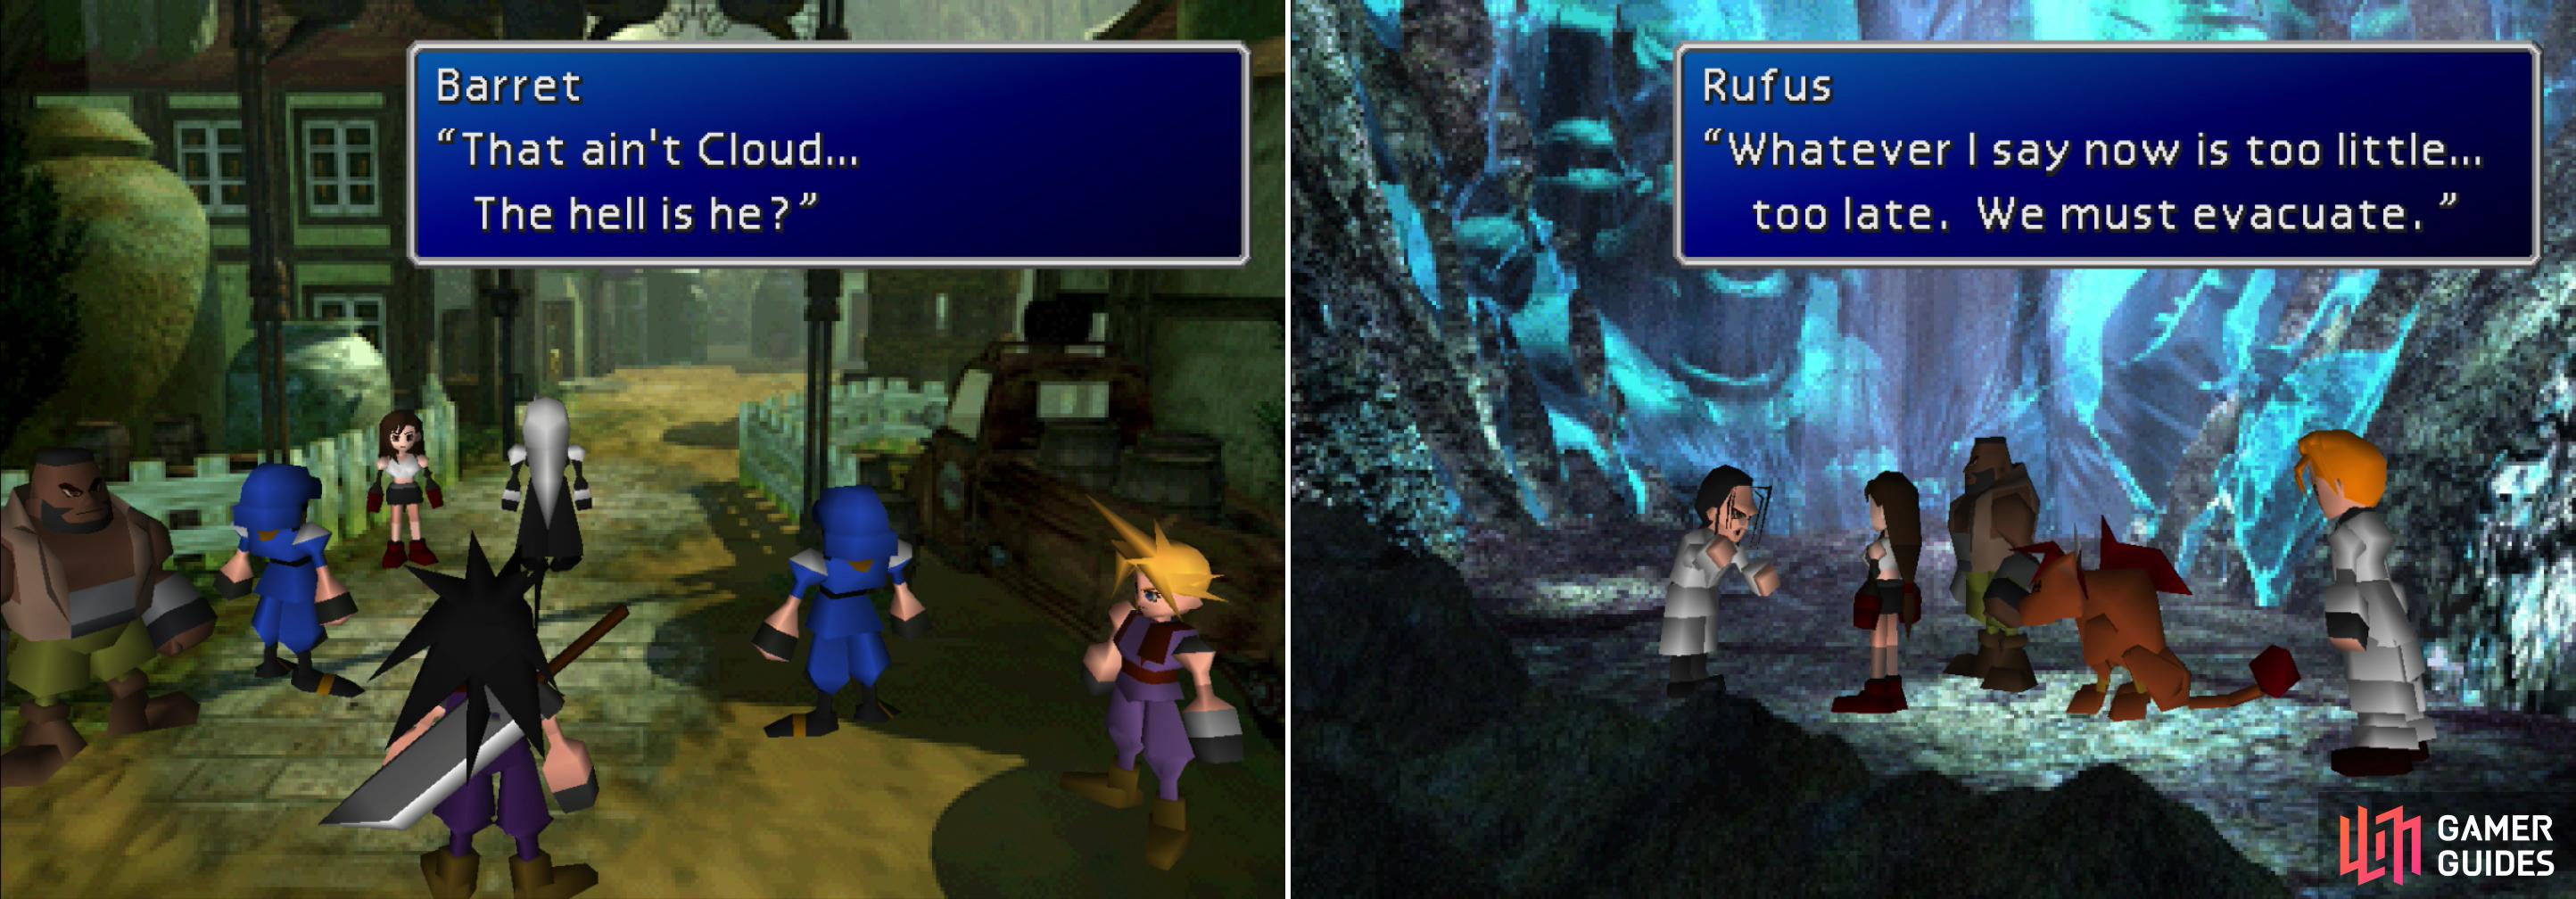 As Cloud closes in on the Promised Land, Sephiroth plays mind tricks with him by showing him illusions that call his past into question (left). After Cloud's encounter with Sephiroth, the party and Shinra make odd bed-fellows (right).